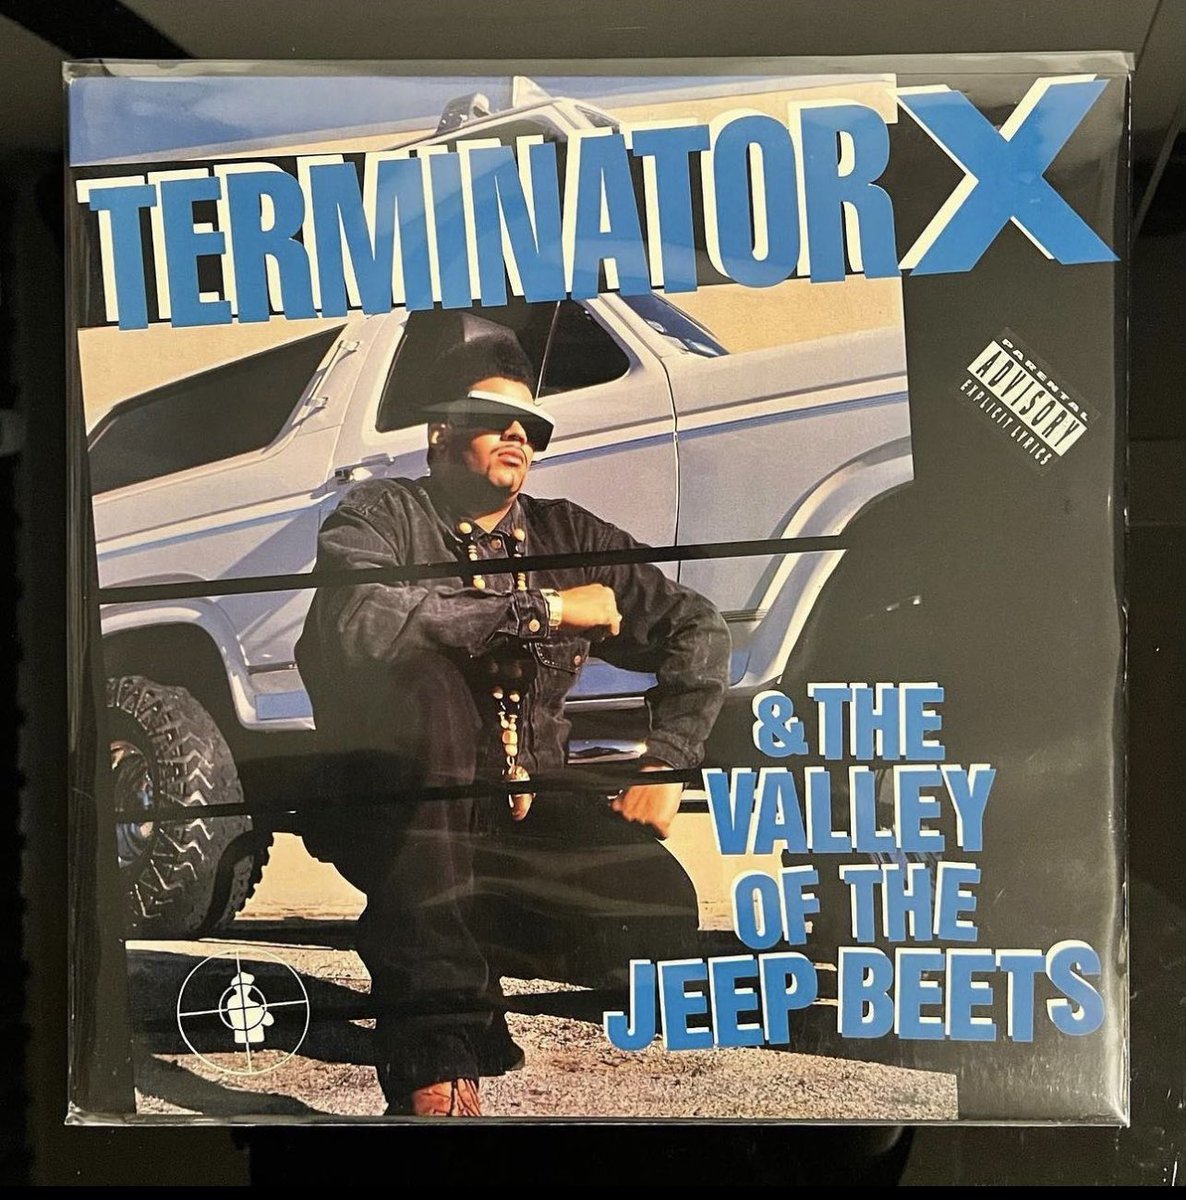 Terminator X 
“& The Valley Of The Jeep Beets”
1991 Original U.S Press
Released 33 years ago today